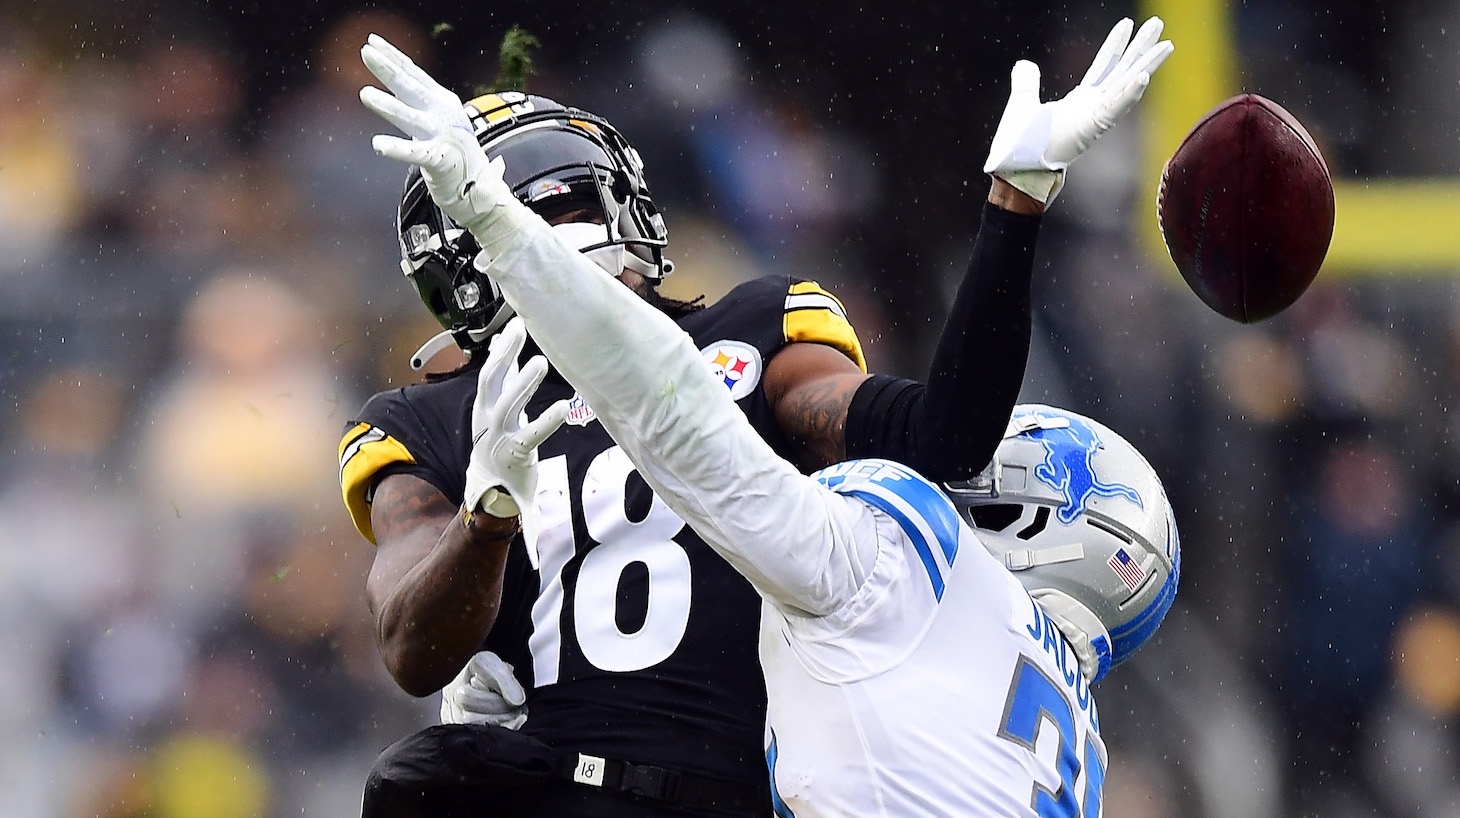 Jerry Jacobs #39 of the Detroit Lions breaks up a pass play intended for Diontae Johnson #18 of the Pittsburgh Steelers in the third quarter at Heinz Field on November 14, 2021 in Pittsburgh, Pennsylvania.